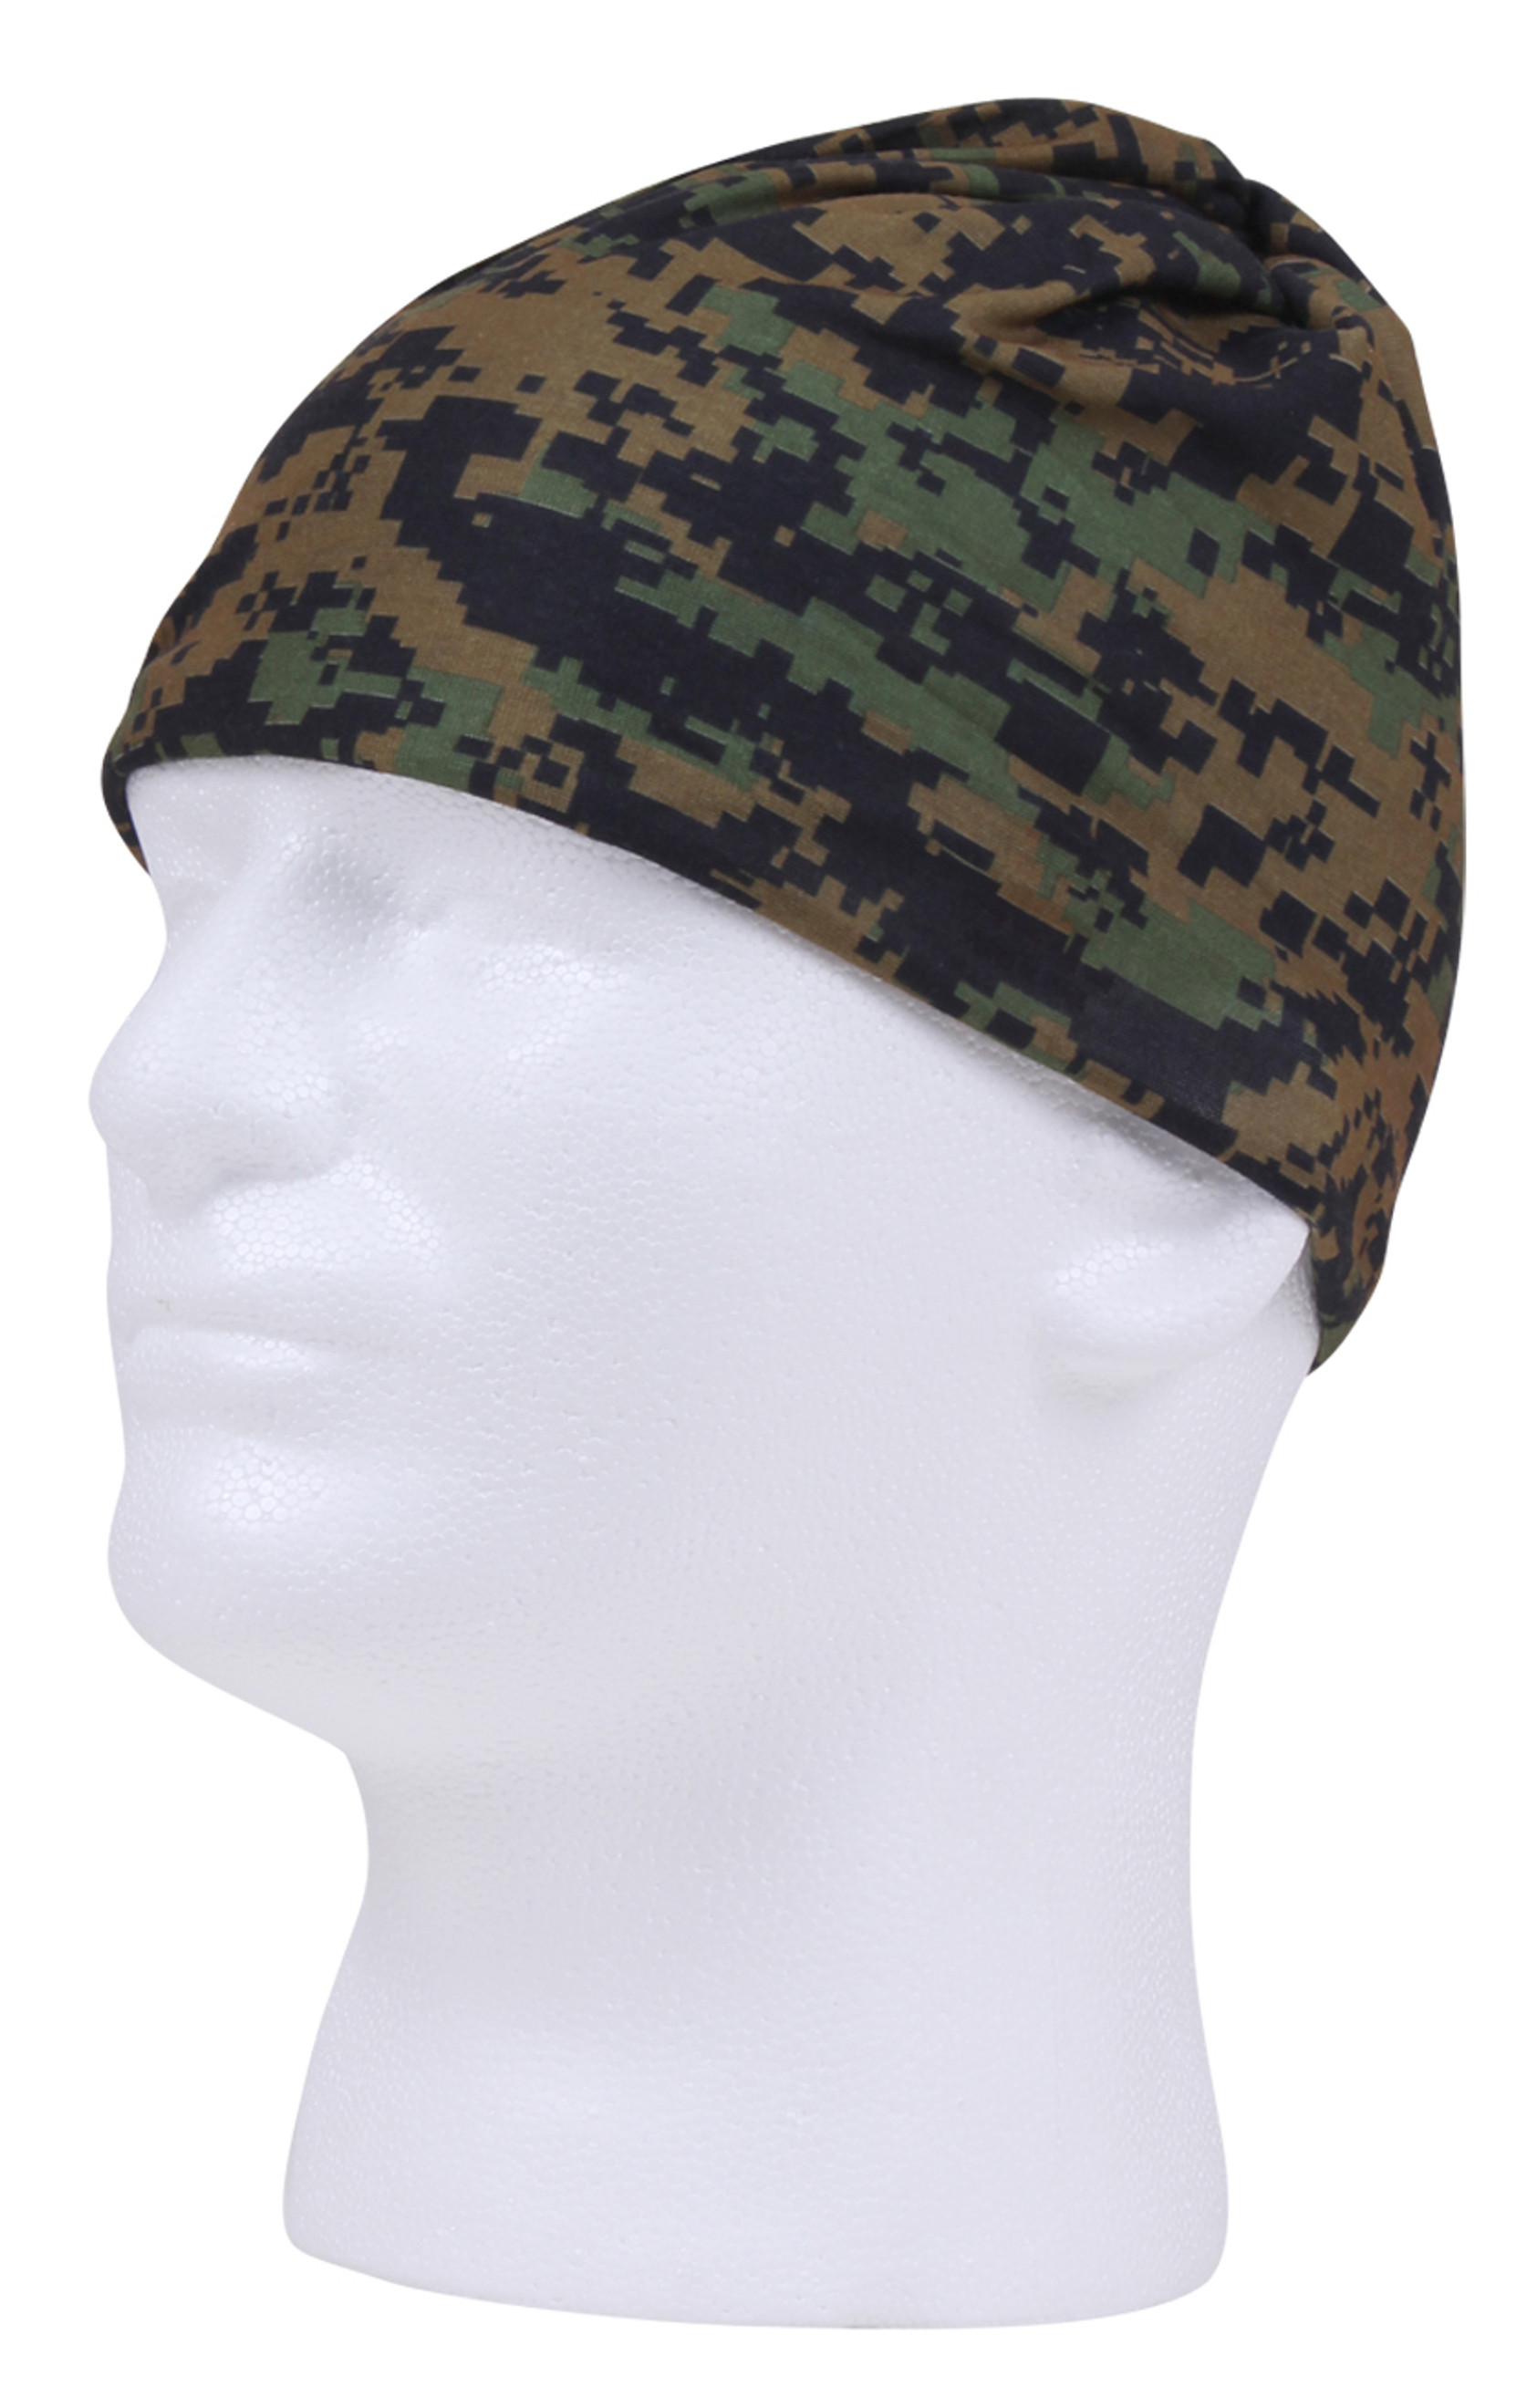 Rothco Multi-Use Neck Gaiter and Face Covering Tactical Wrap - Woodland Digital Camo